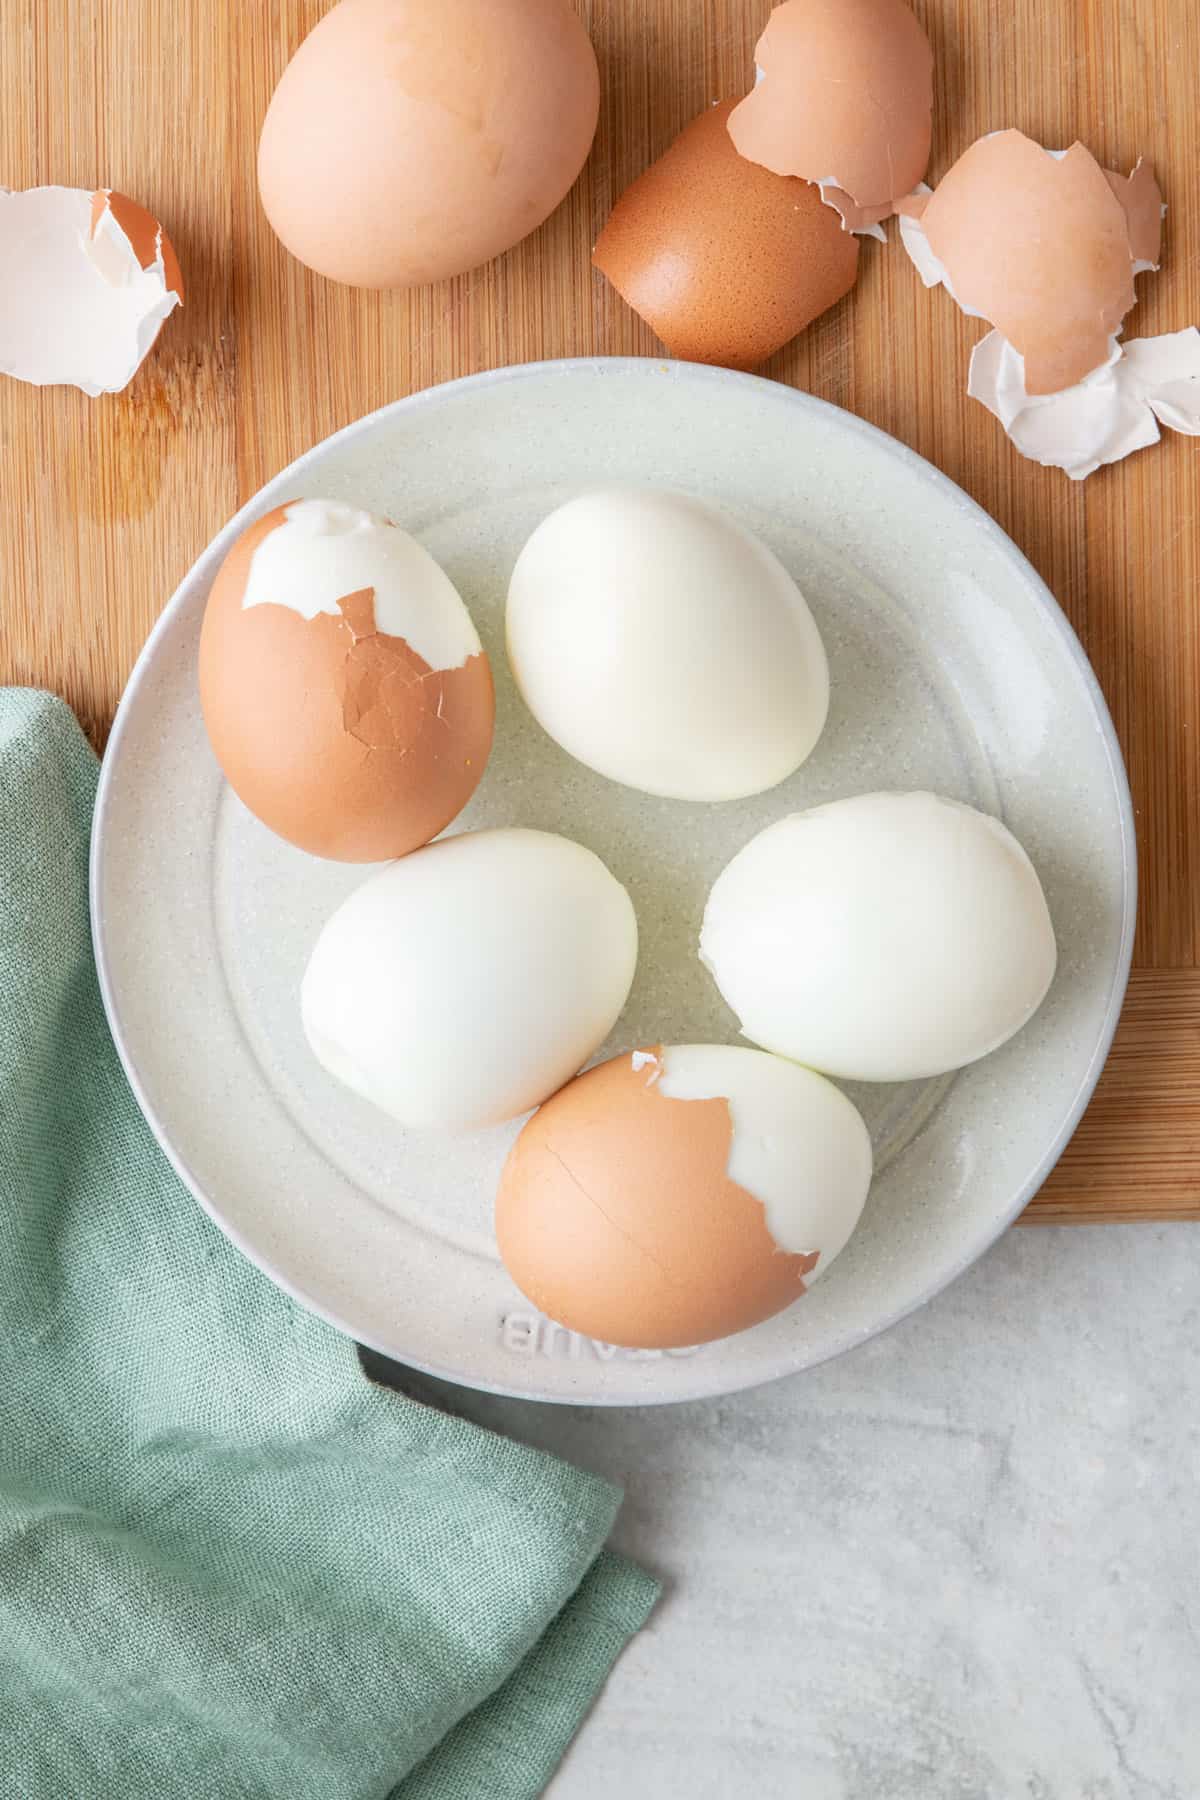 Peeled and partially peeled boiled eggs on a plate next to removed shells.